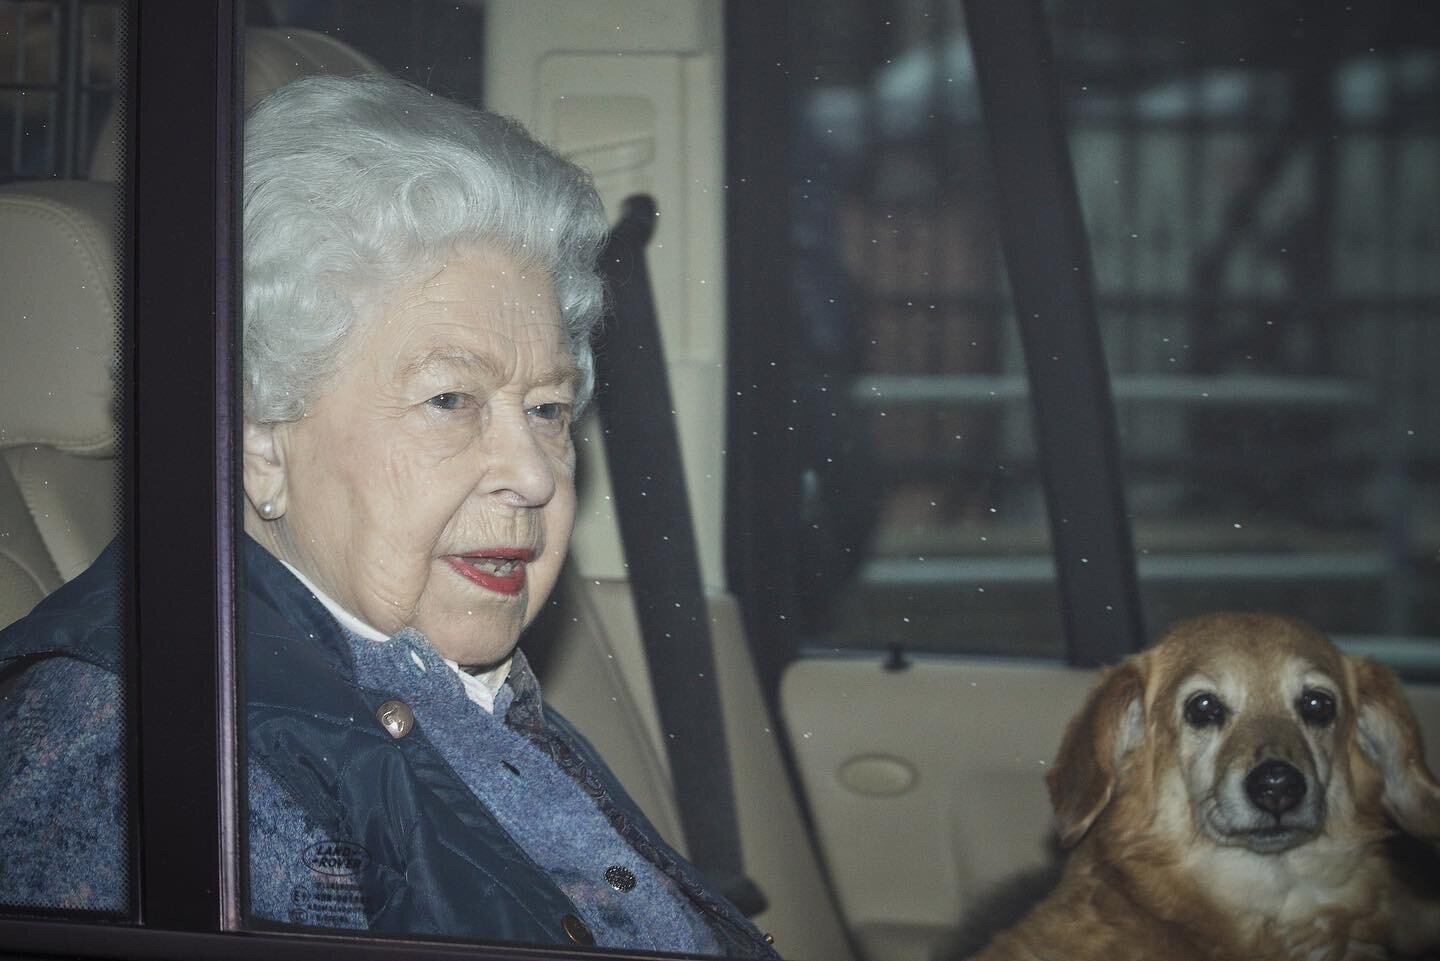  Queen Elizabeth II leaving Buckingham Palace, London, for Windsor Castle to socially distance herself amid the coronavirus pandemic. Selected by PA Photographer Aaron Chown as his own favourite picture of the year. Picture by: Aaron Chown/PA Images.